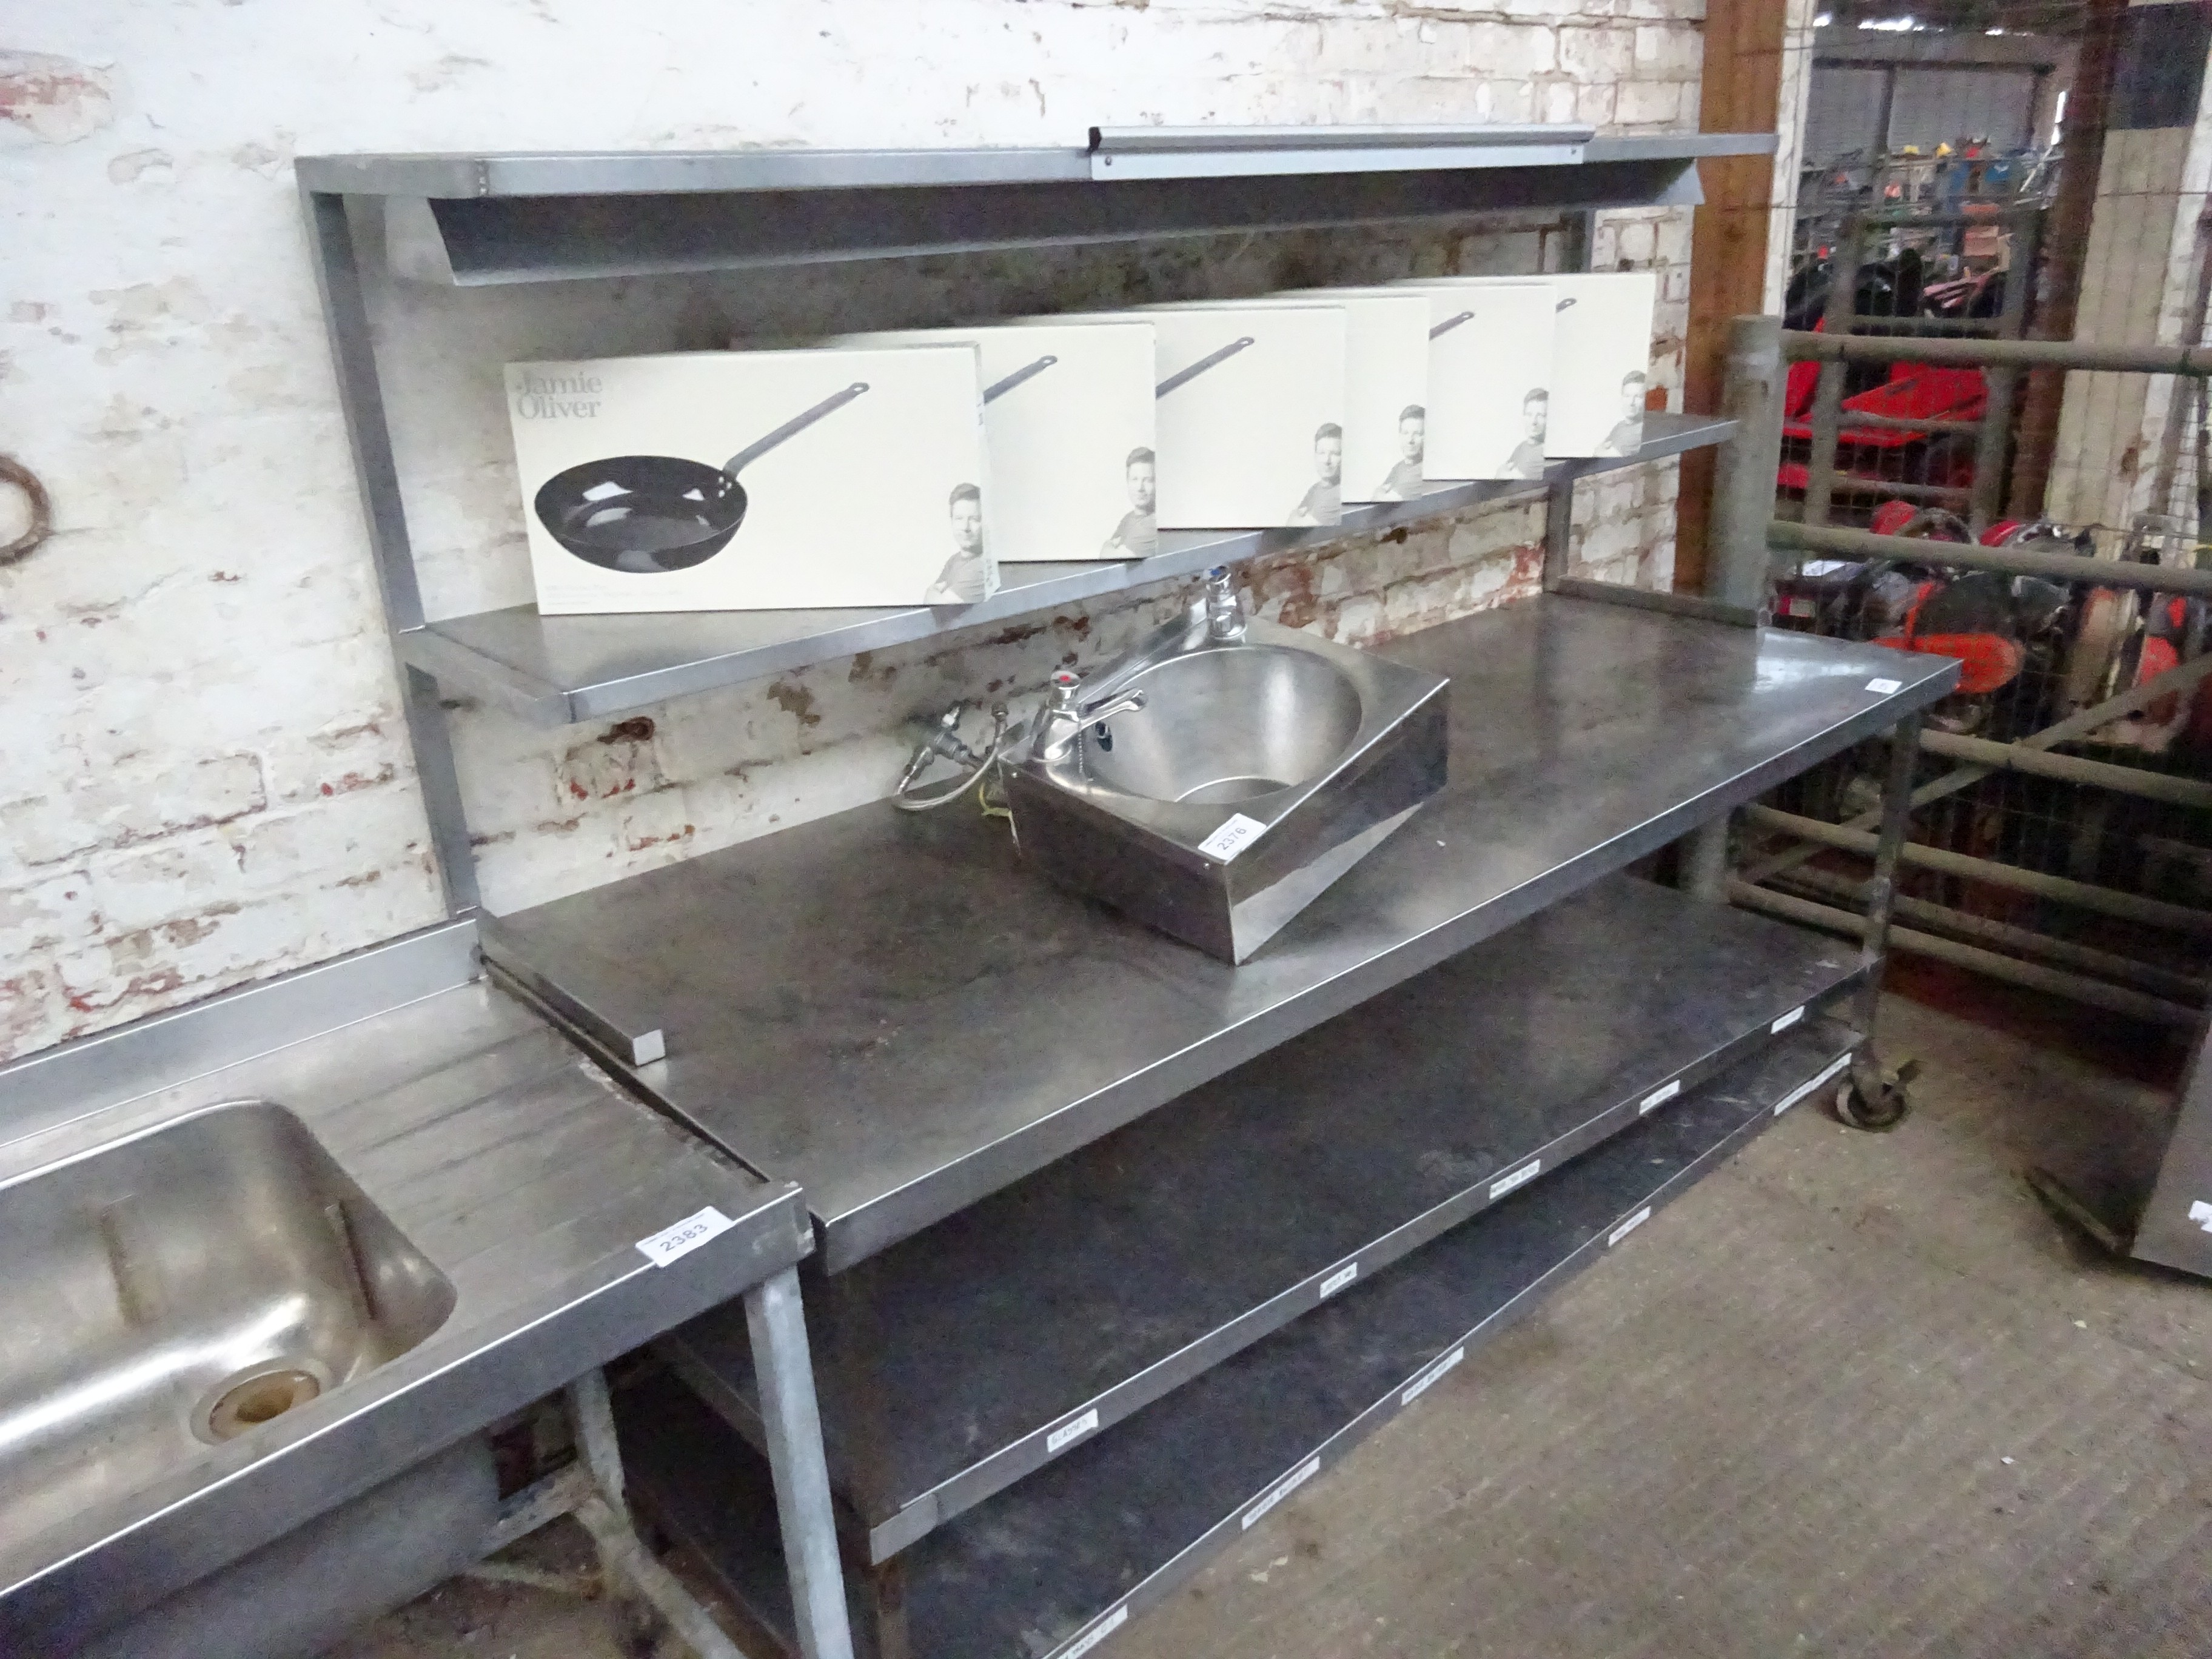 Mobile stainless steel preparation table with under and over shelves.